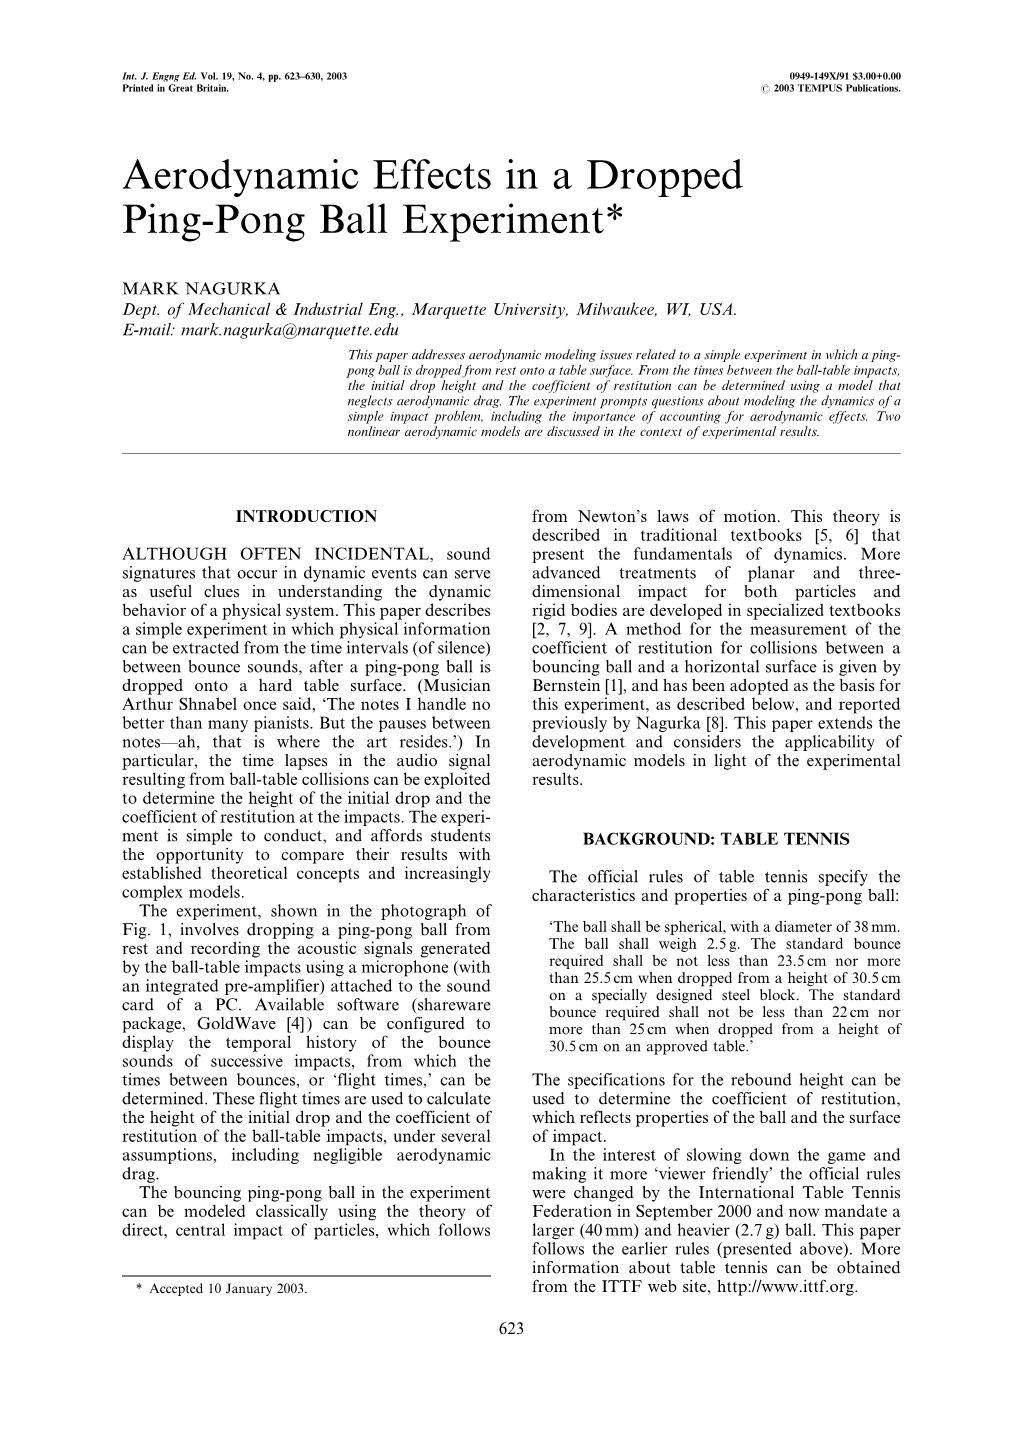 Aerodynamic Effects in a Dropped Ping-Pong Ball Experiment*